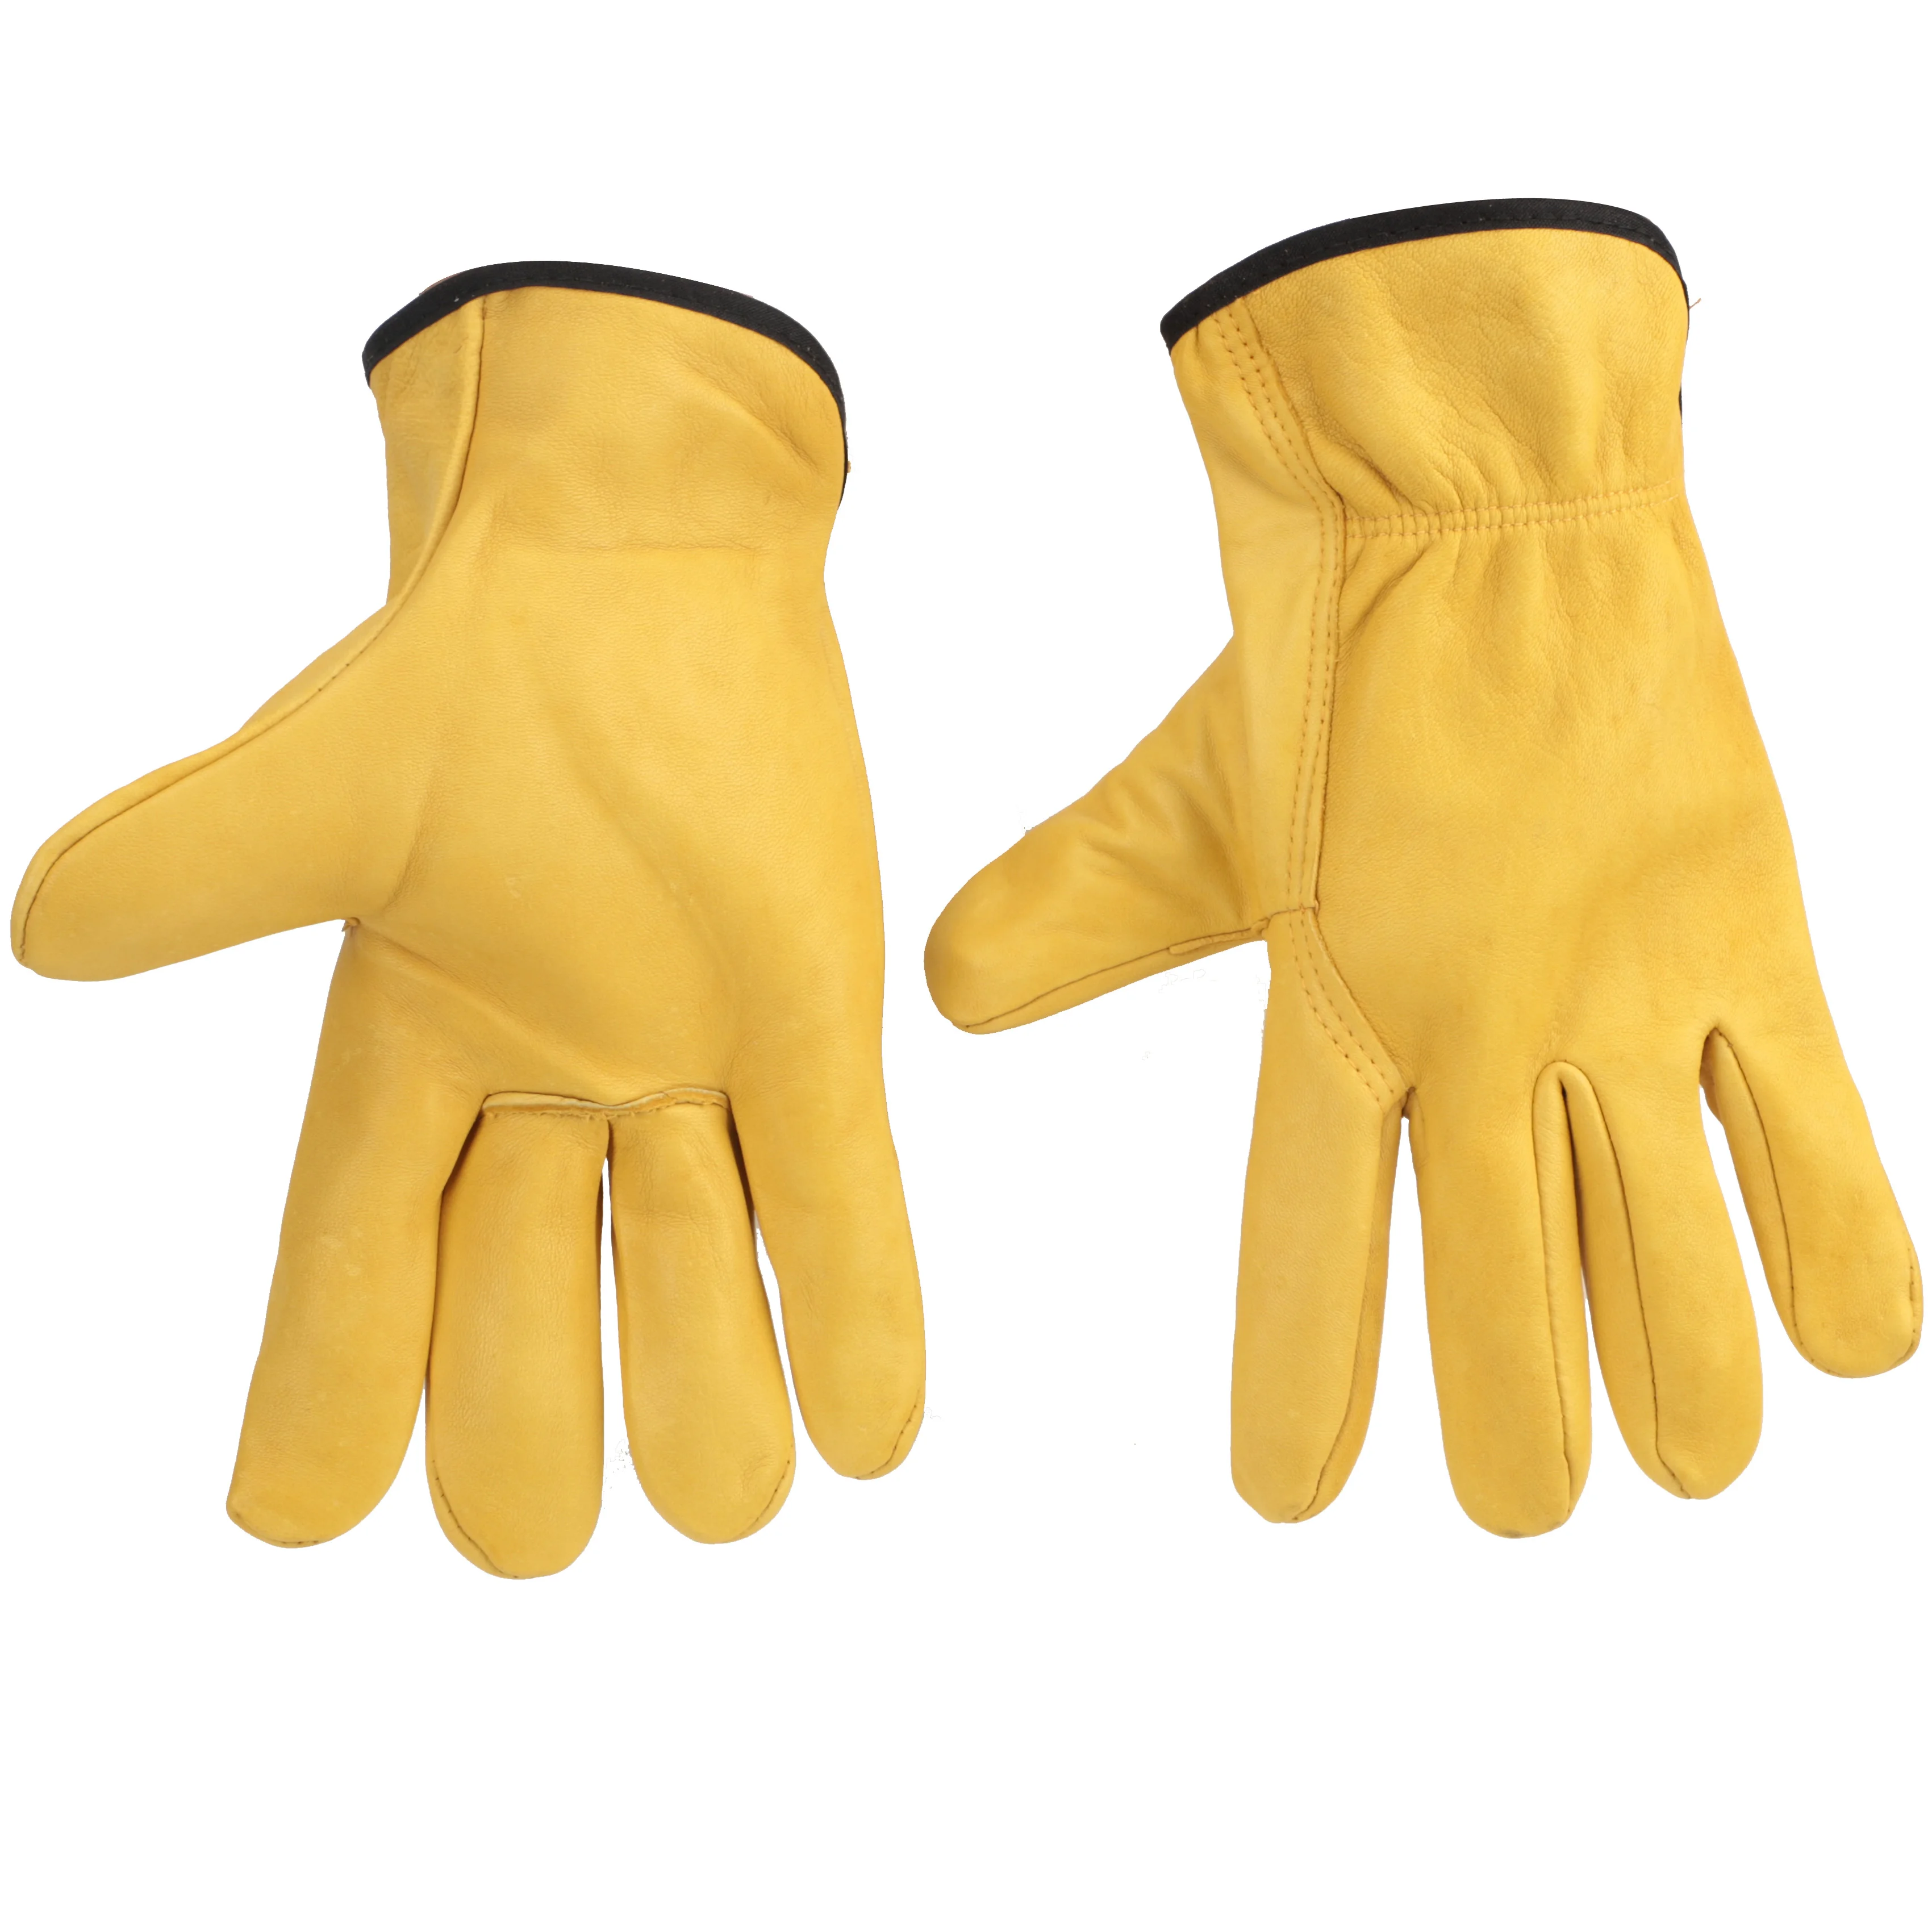 

HHPROTECT Leather Working Gloves Men's Work Cowhide Gloves Gardening Digging Planting Plant Flower Pruning Protective Glove